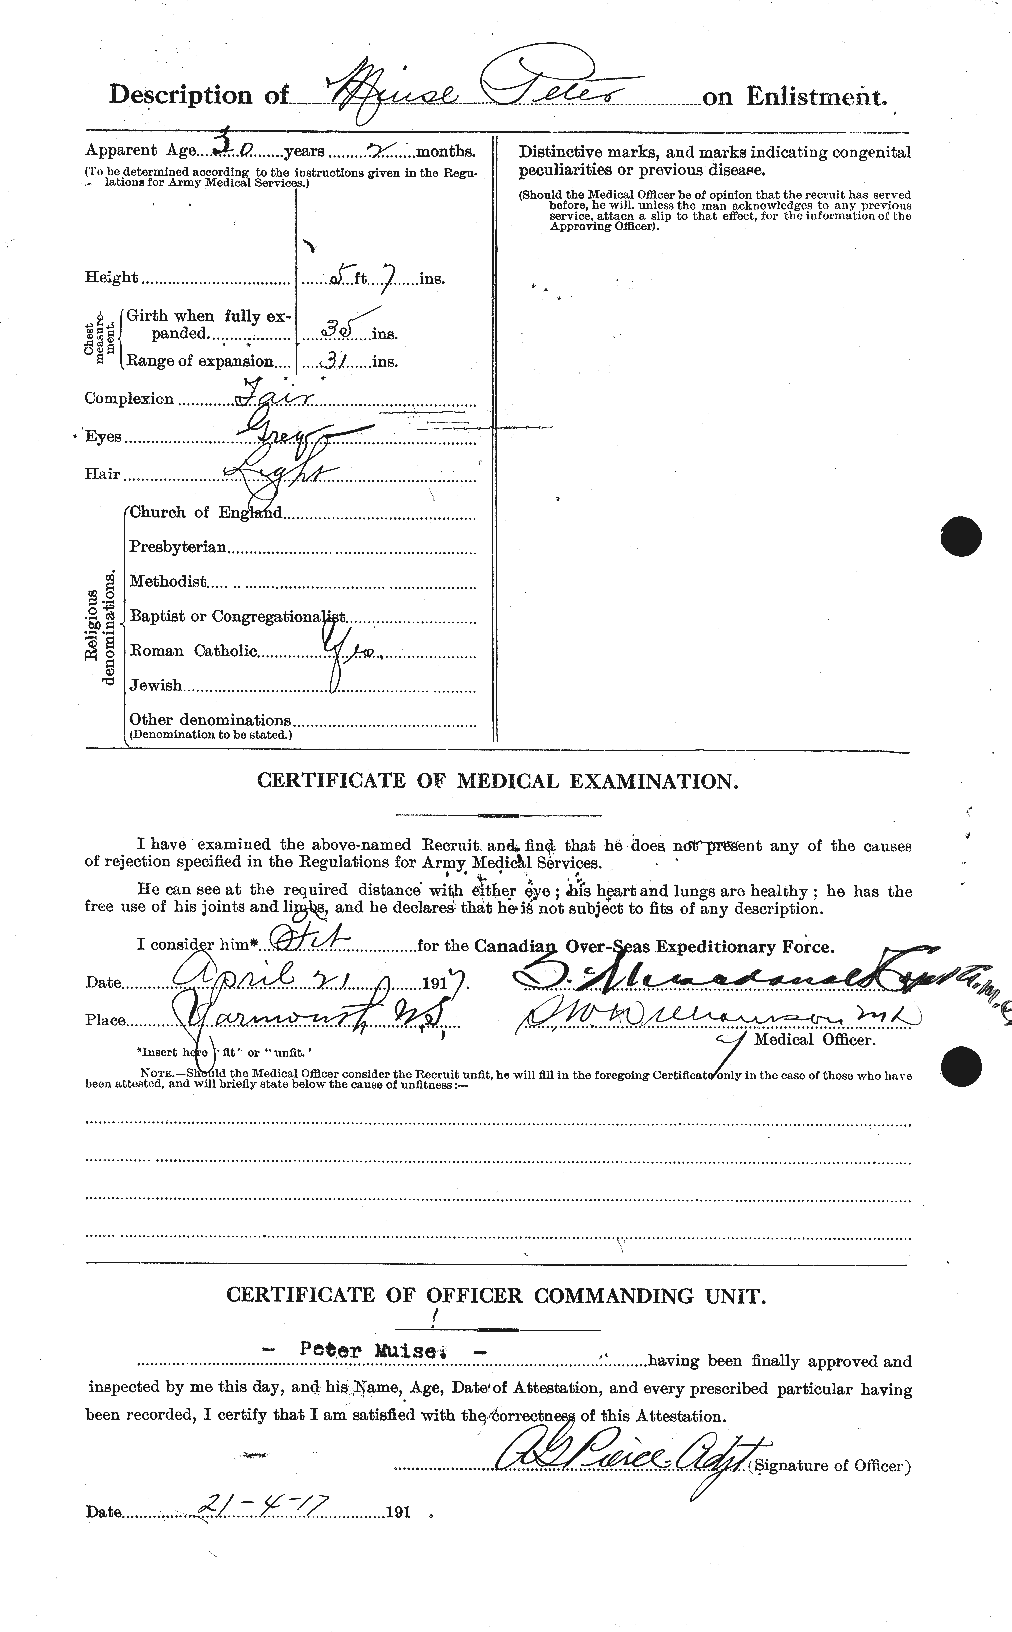 Personnel Records of the First World War - CEF 494742b